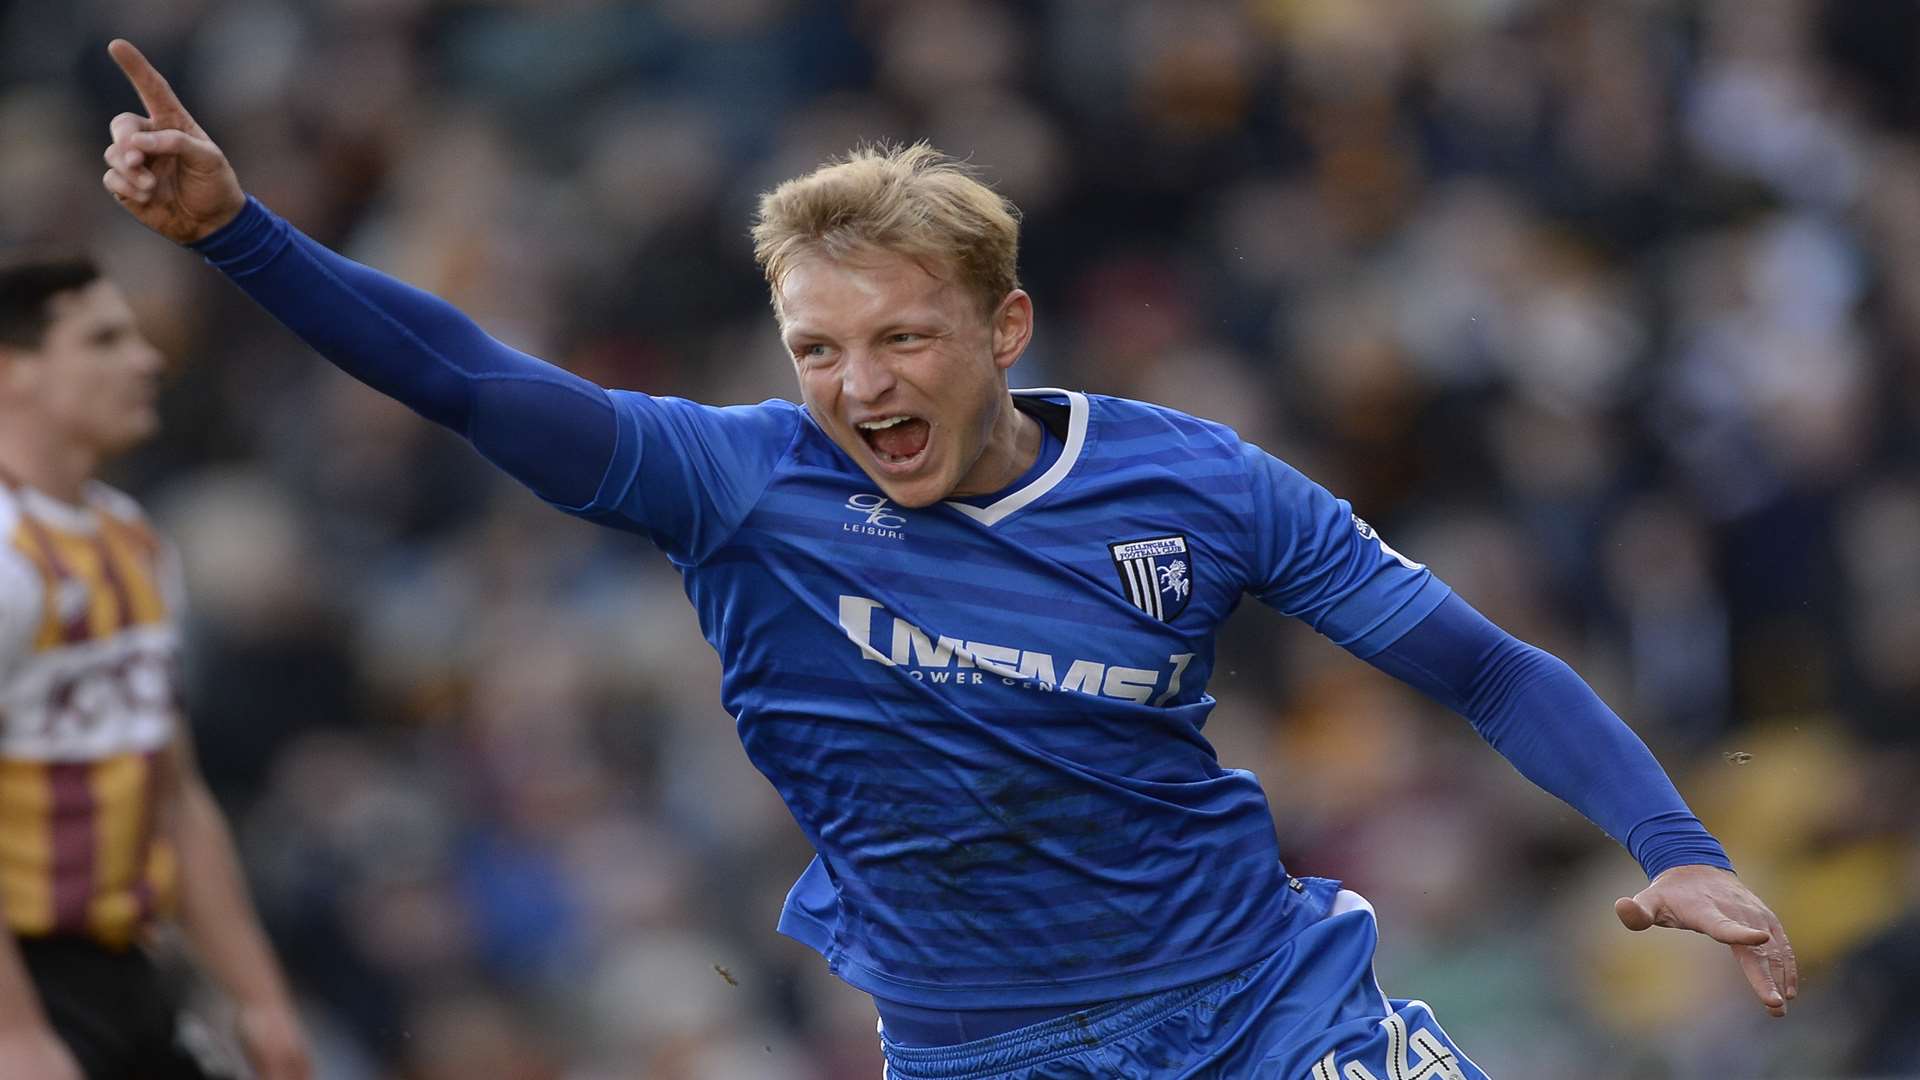 Josh Wright wheels away after claiming Gills' opening goal on Saturday Picture: Ady Kerry